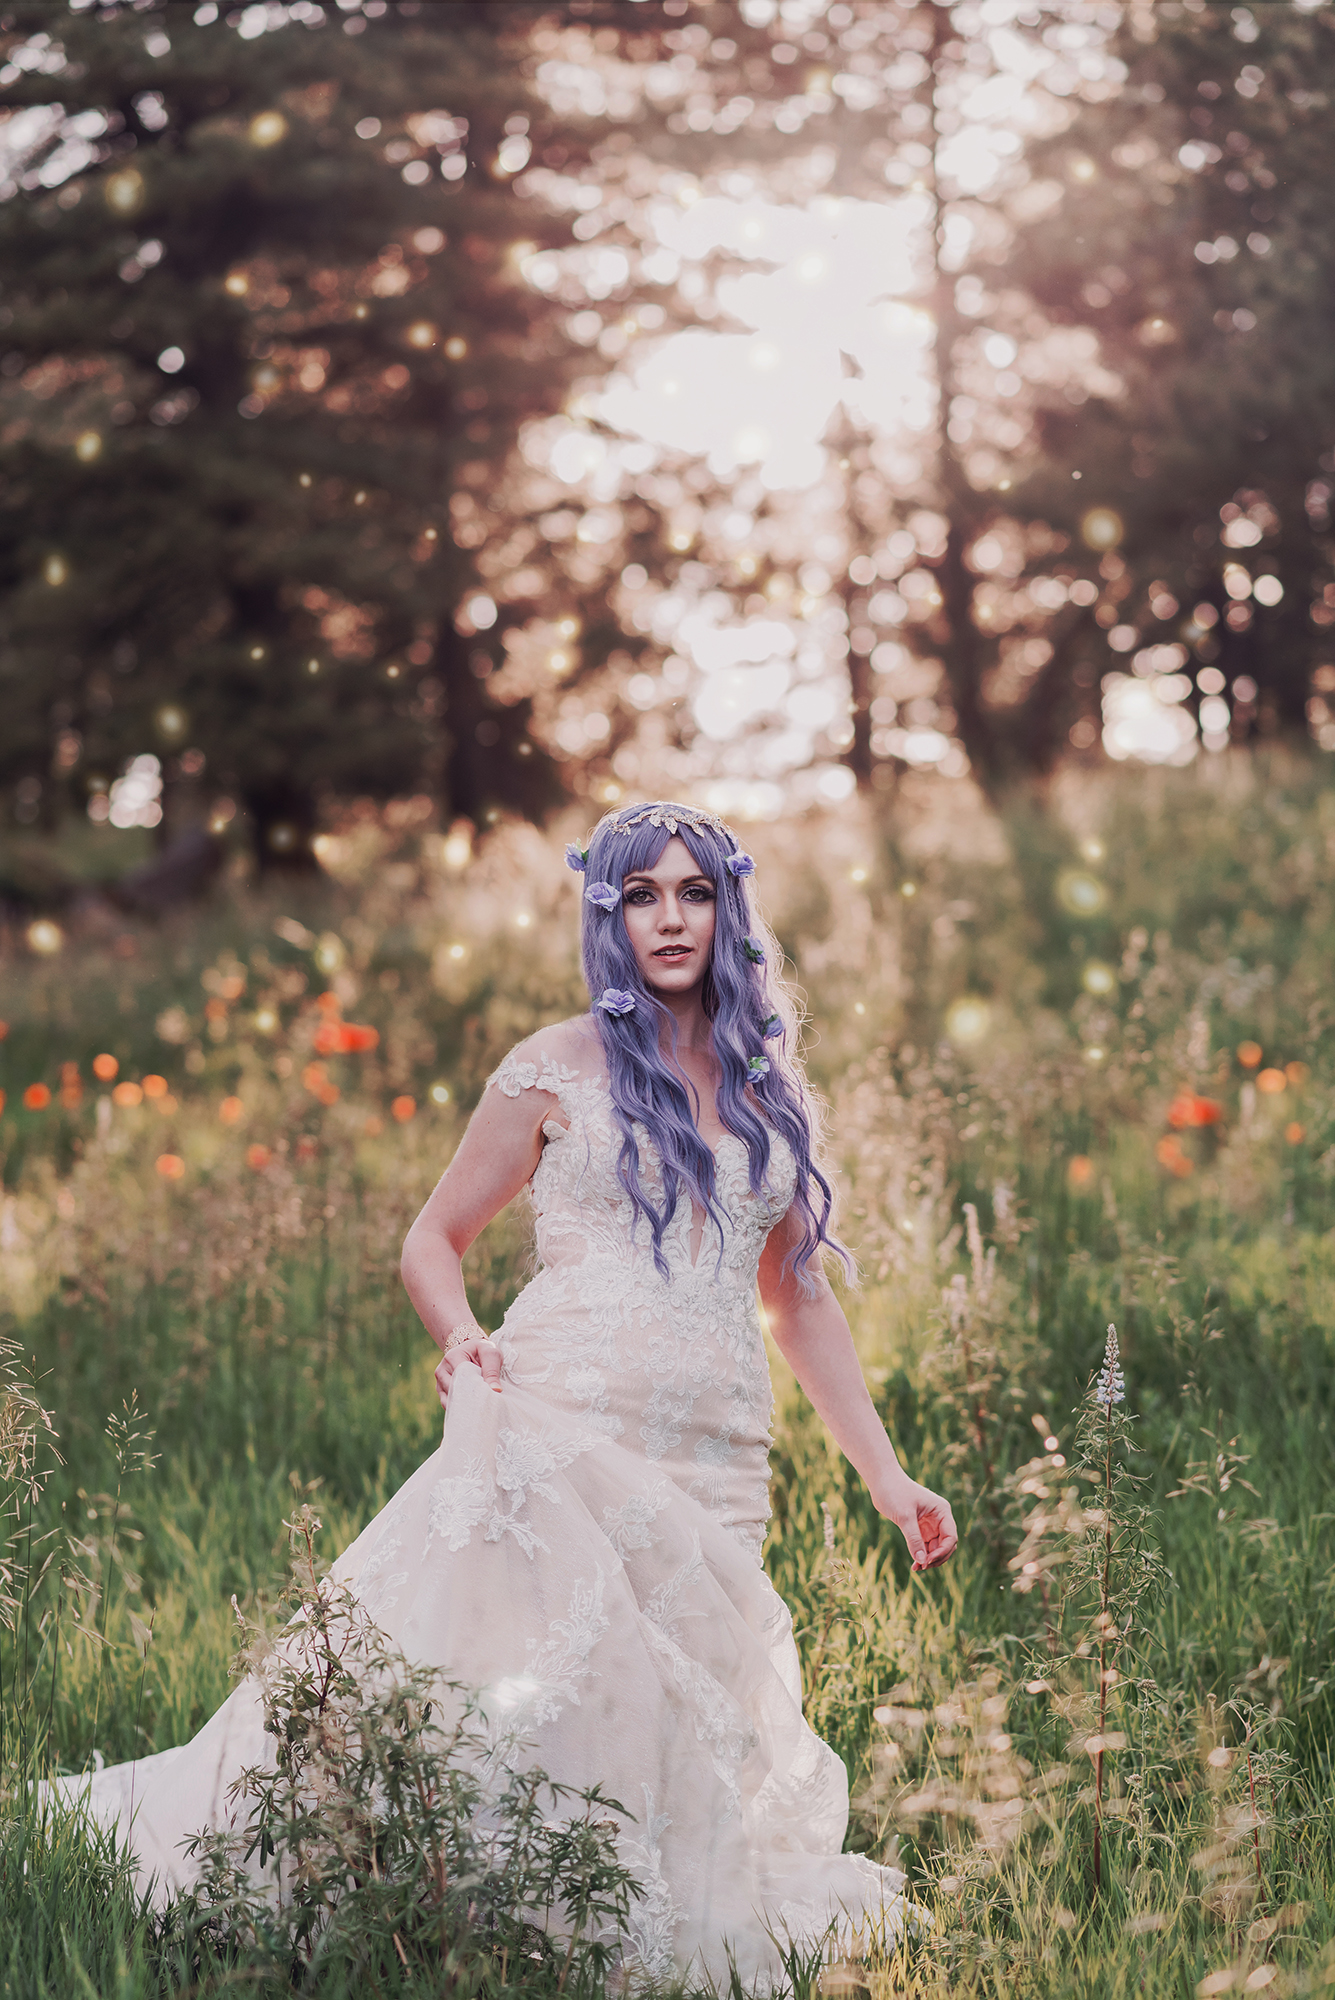 Kendra Colleen Photography takes a fantasy bridal portrait of a woman with purple hair, wearing a white dress, standing in a field of wildflowers in the woods of Boulder Colorado.